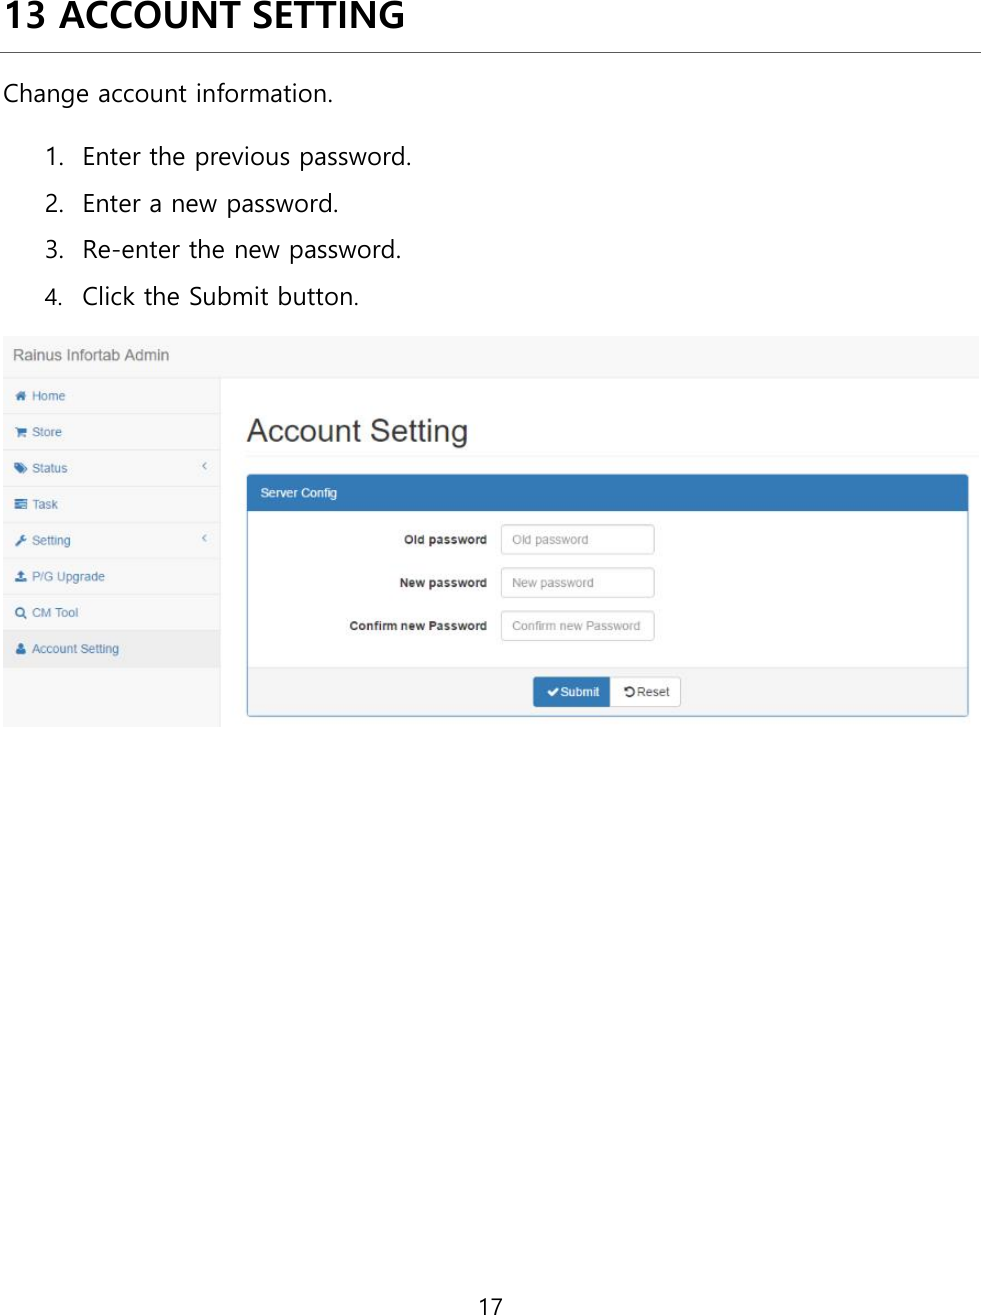 17  13  ACCOUNT SETTING Change account information. 1. Enter the previous password. 2. Enter a new password.  3. Re-enter the new password. 4. Click the Submit button.           